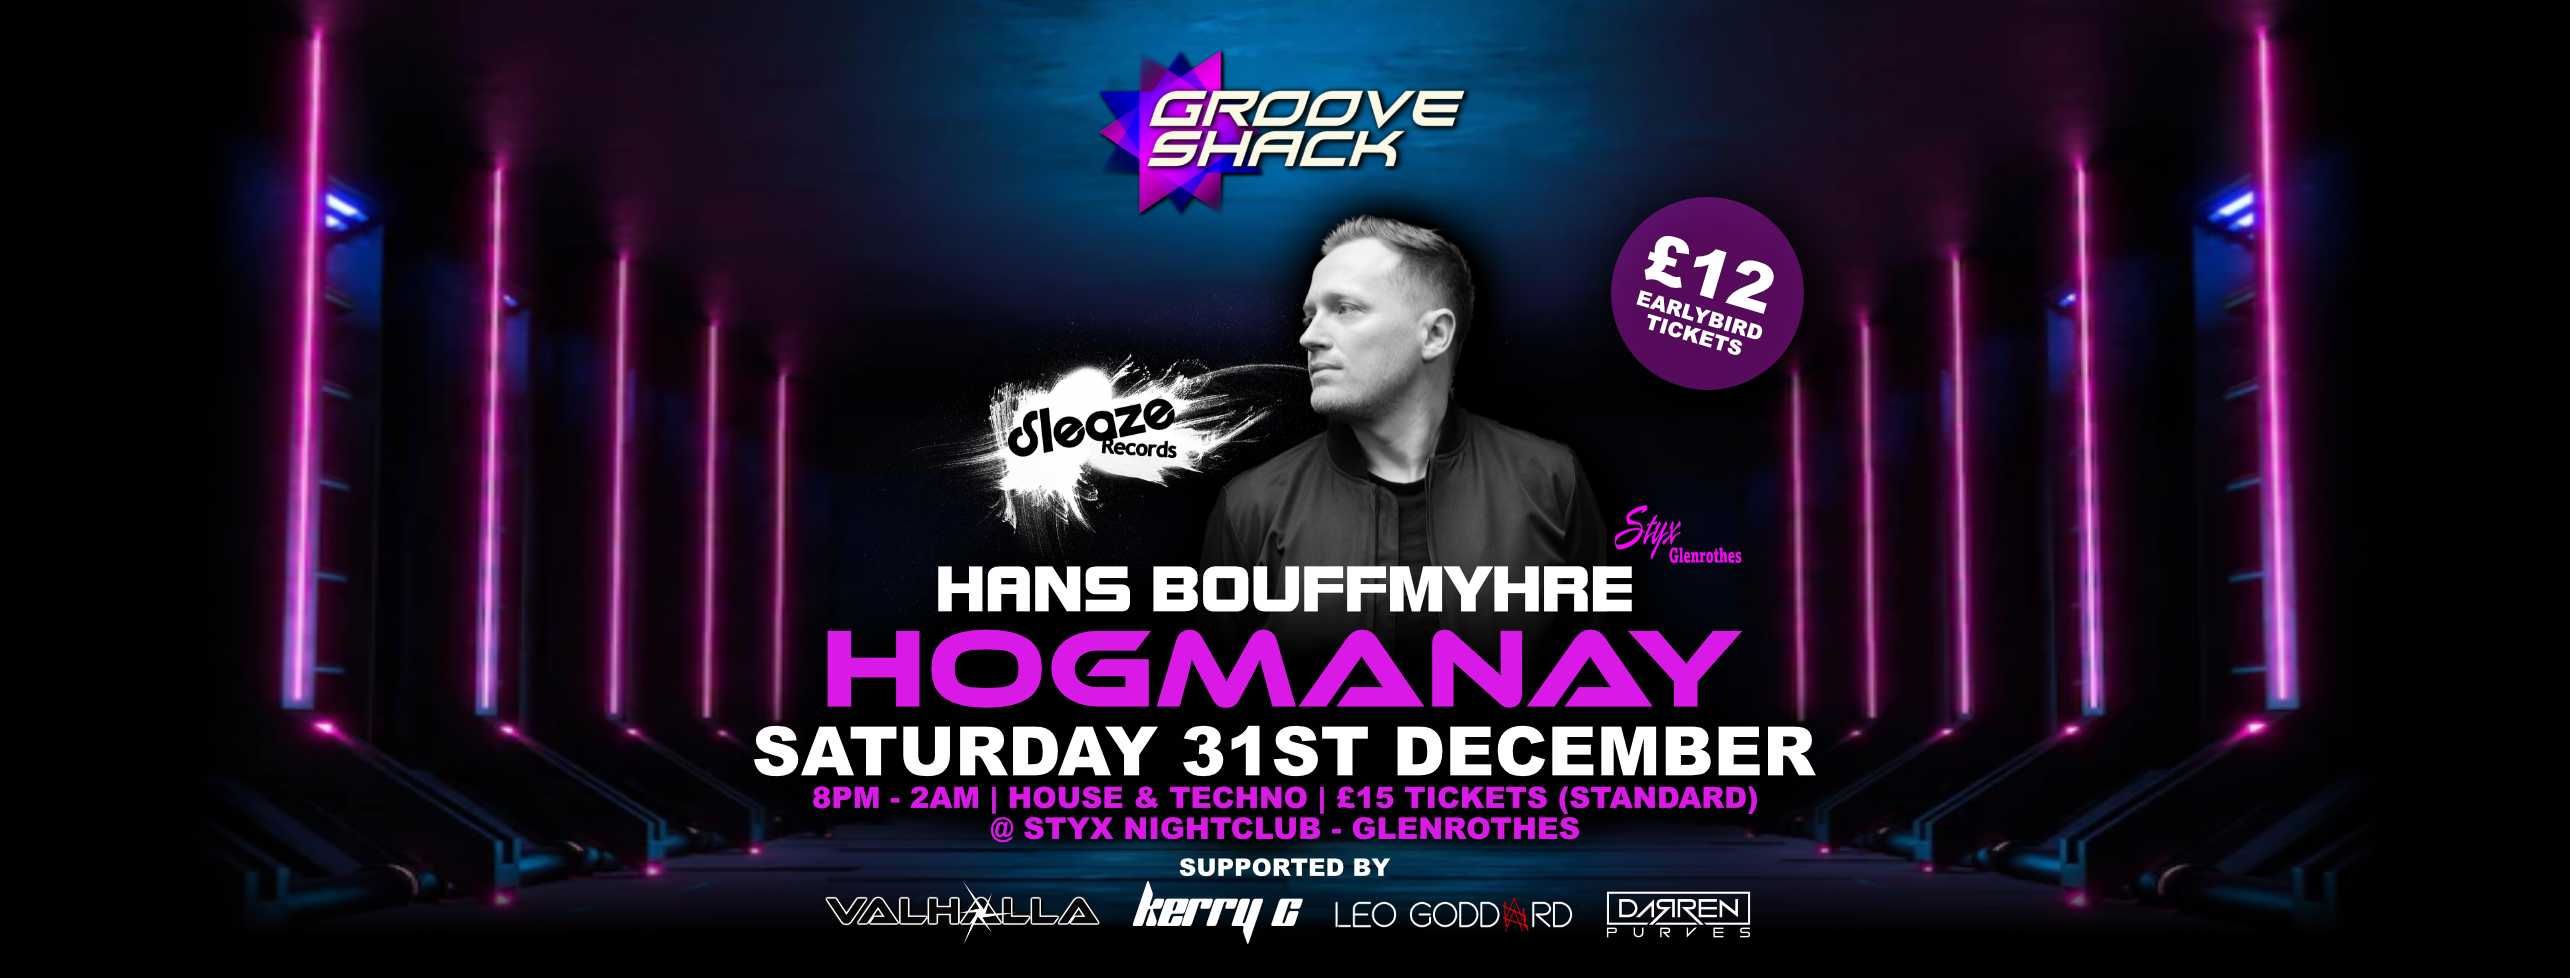 Groove Shack presents HOGMANY with Hans Bouffmyhre - フライヤー表